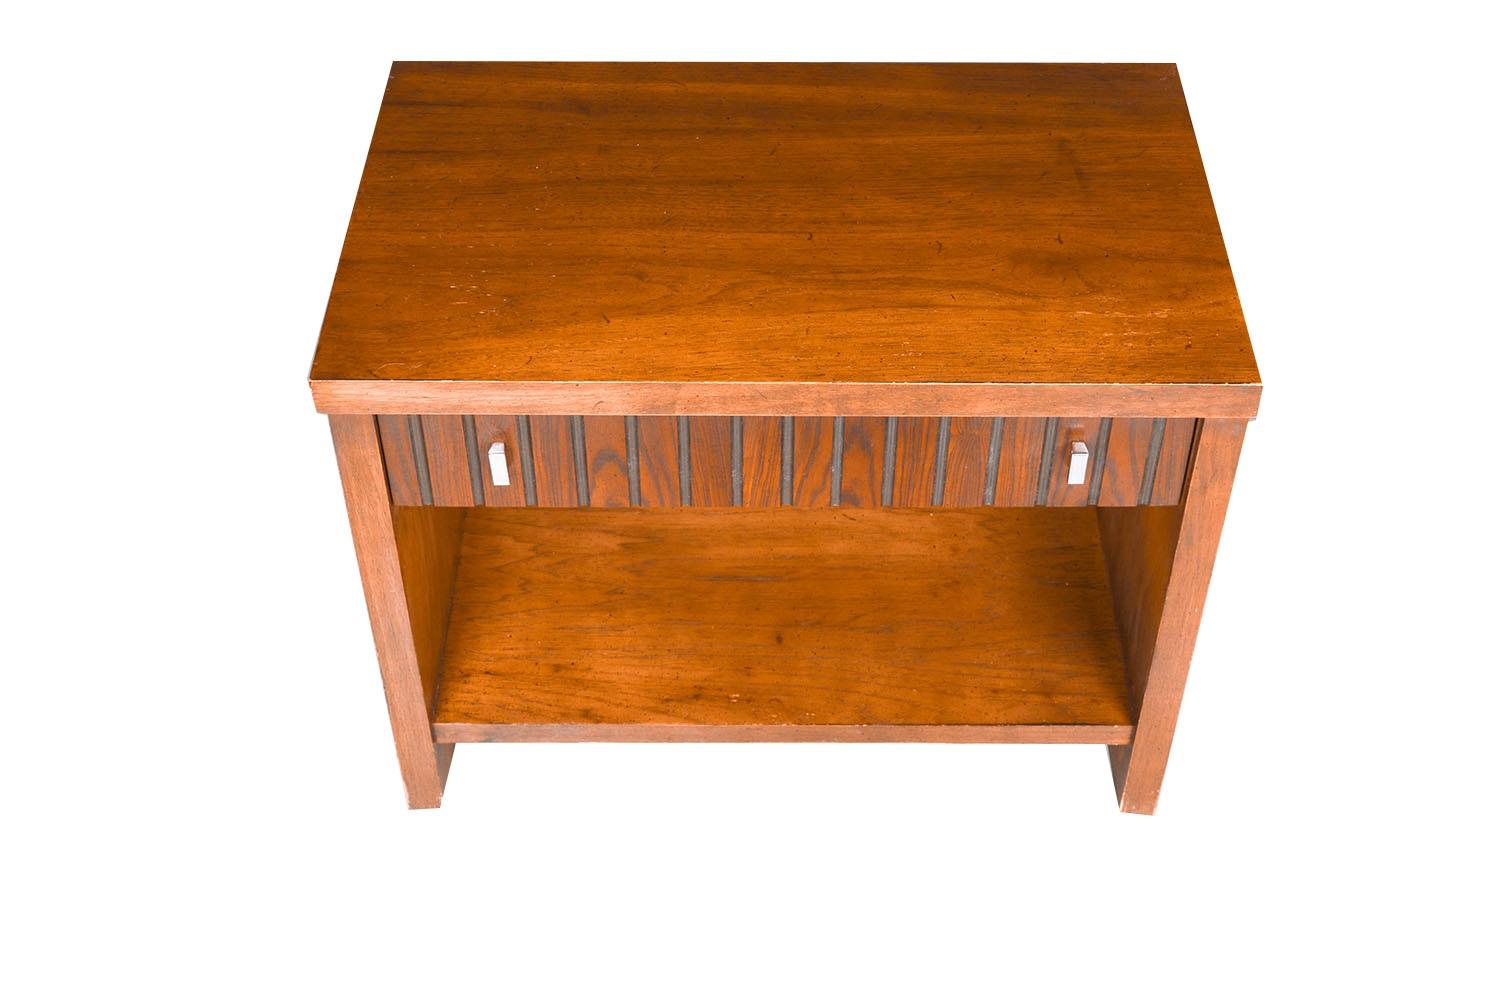 An elegant side/ end table from the Lane furniture “tower suite”. This is a beautiful example of Mid-Century craftsmanship by Lane Furniture. This retro piece was constructed with top of the line hardware, and excellently crafted woodwork. Features